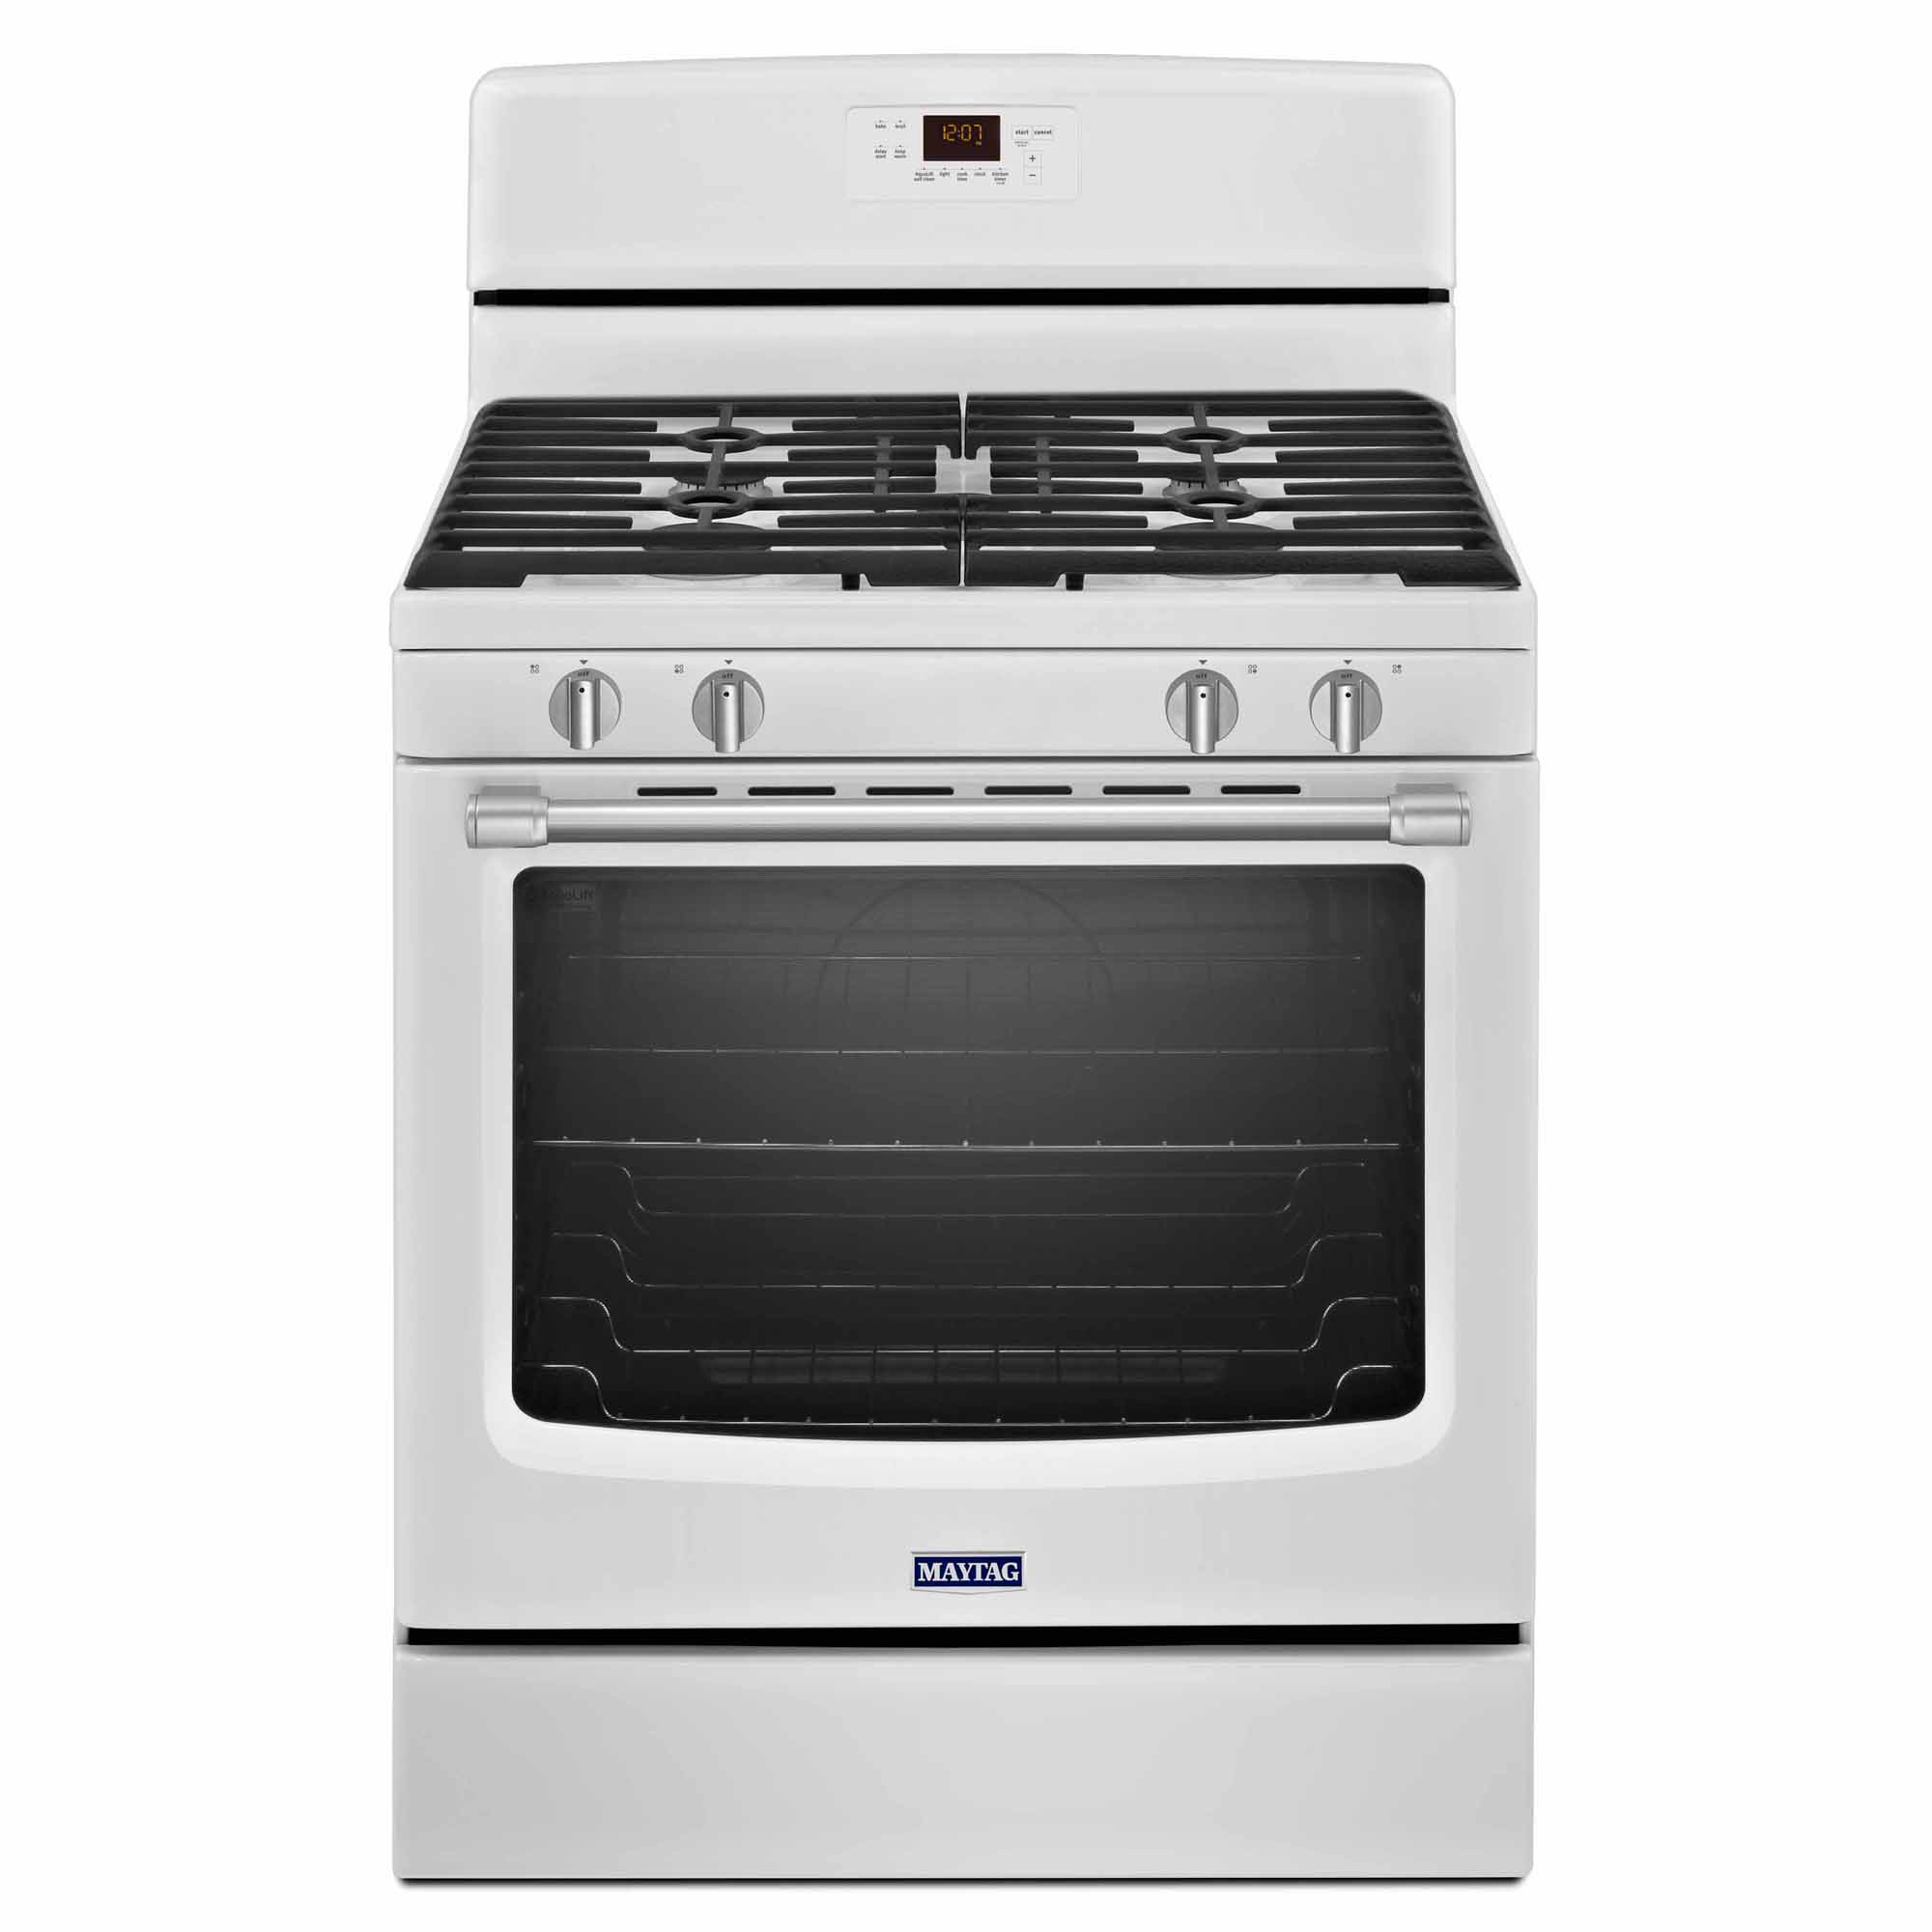 What does the Maytag warranty policy say about range repairs?